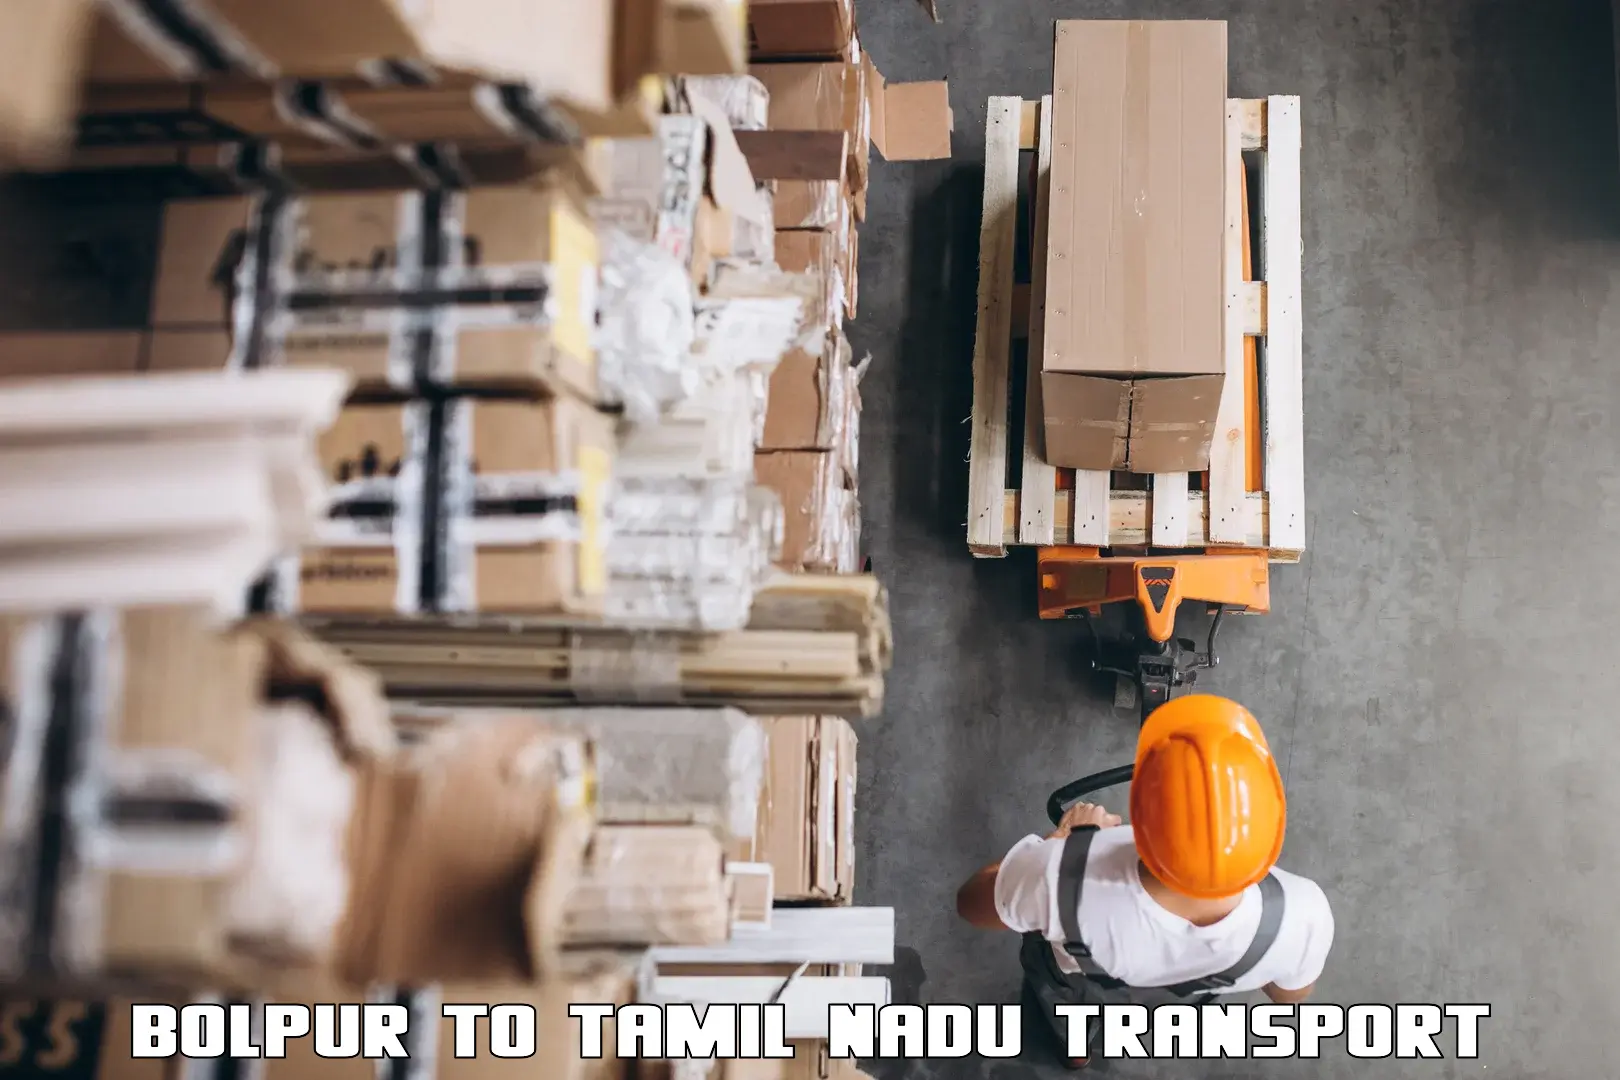 Part load transport service in India Bolpur to Chennai Port